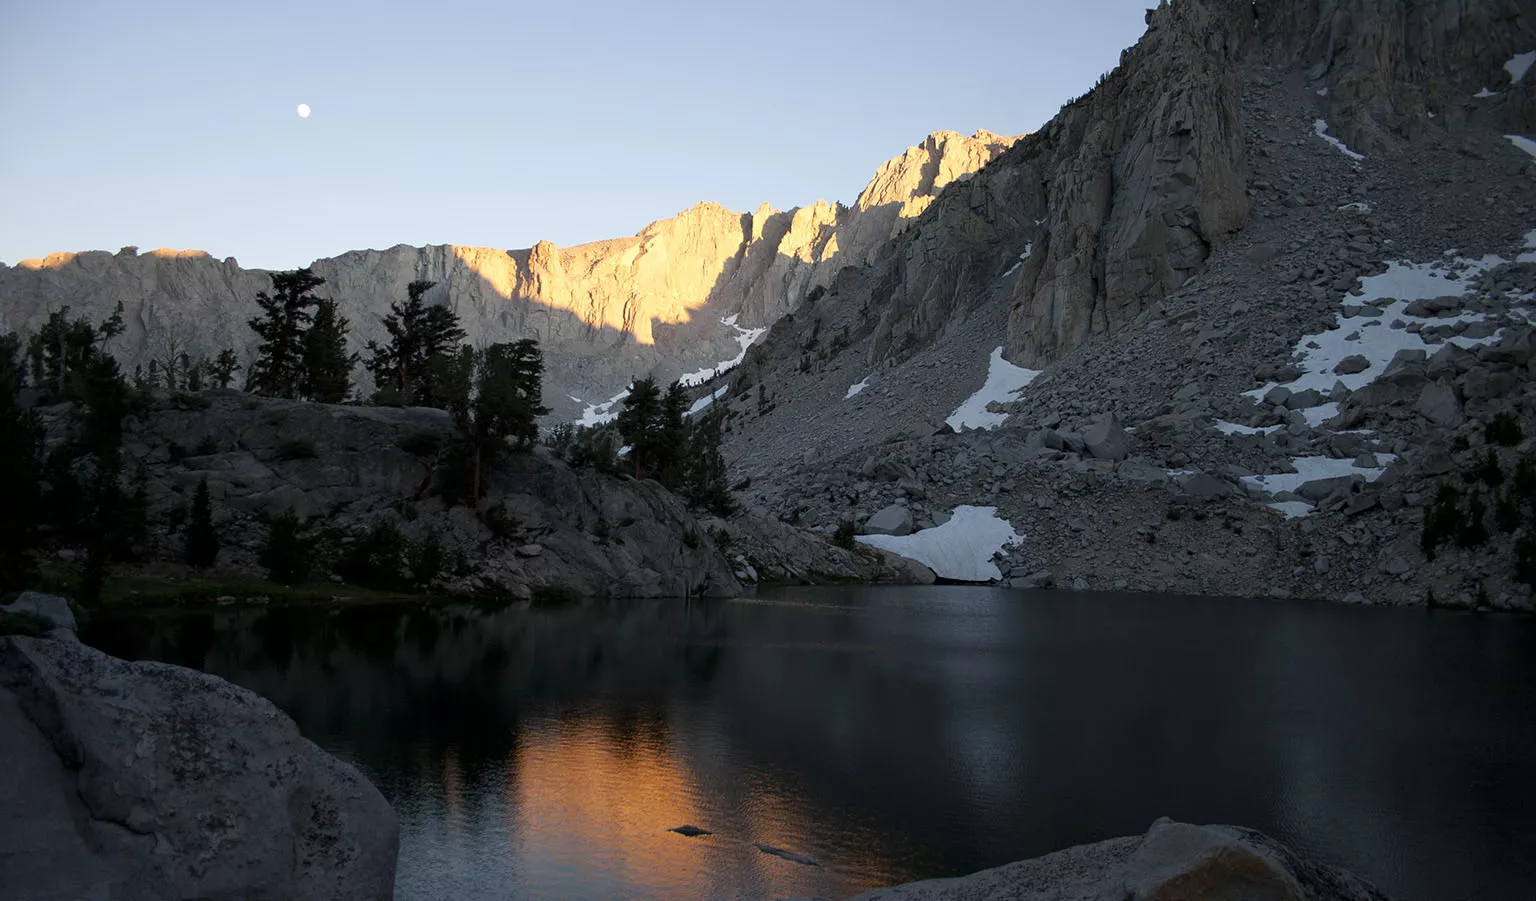 Heart Lake before sunset. Our camp was on the boulder left of center